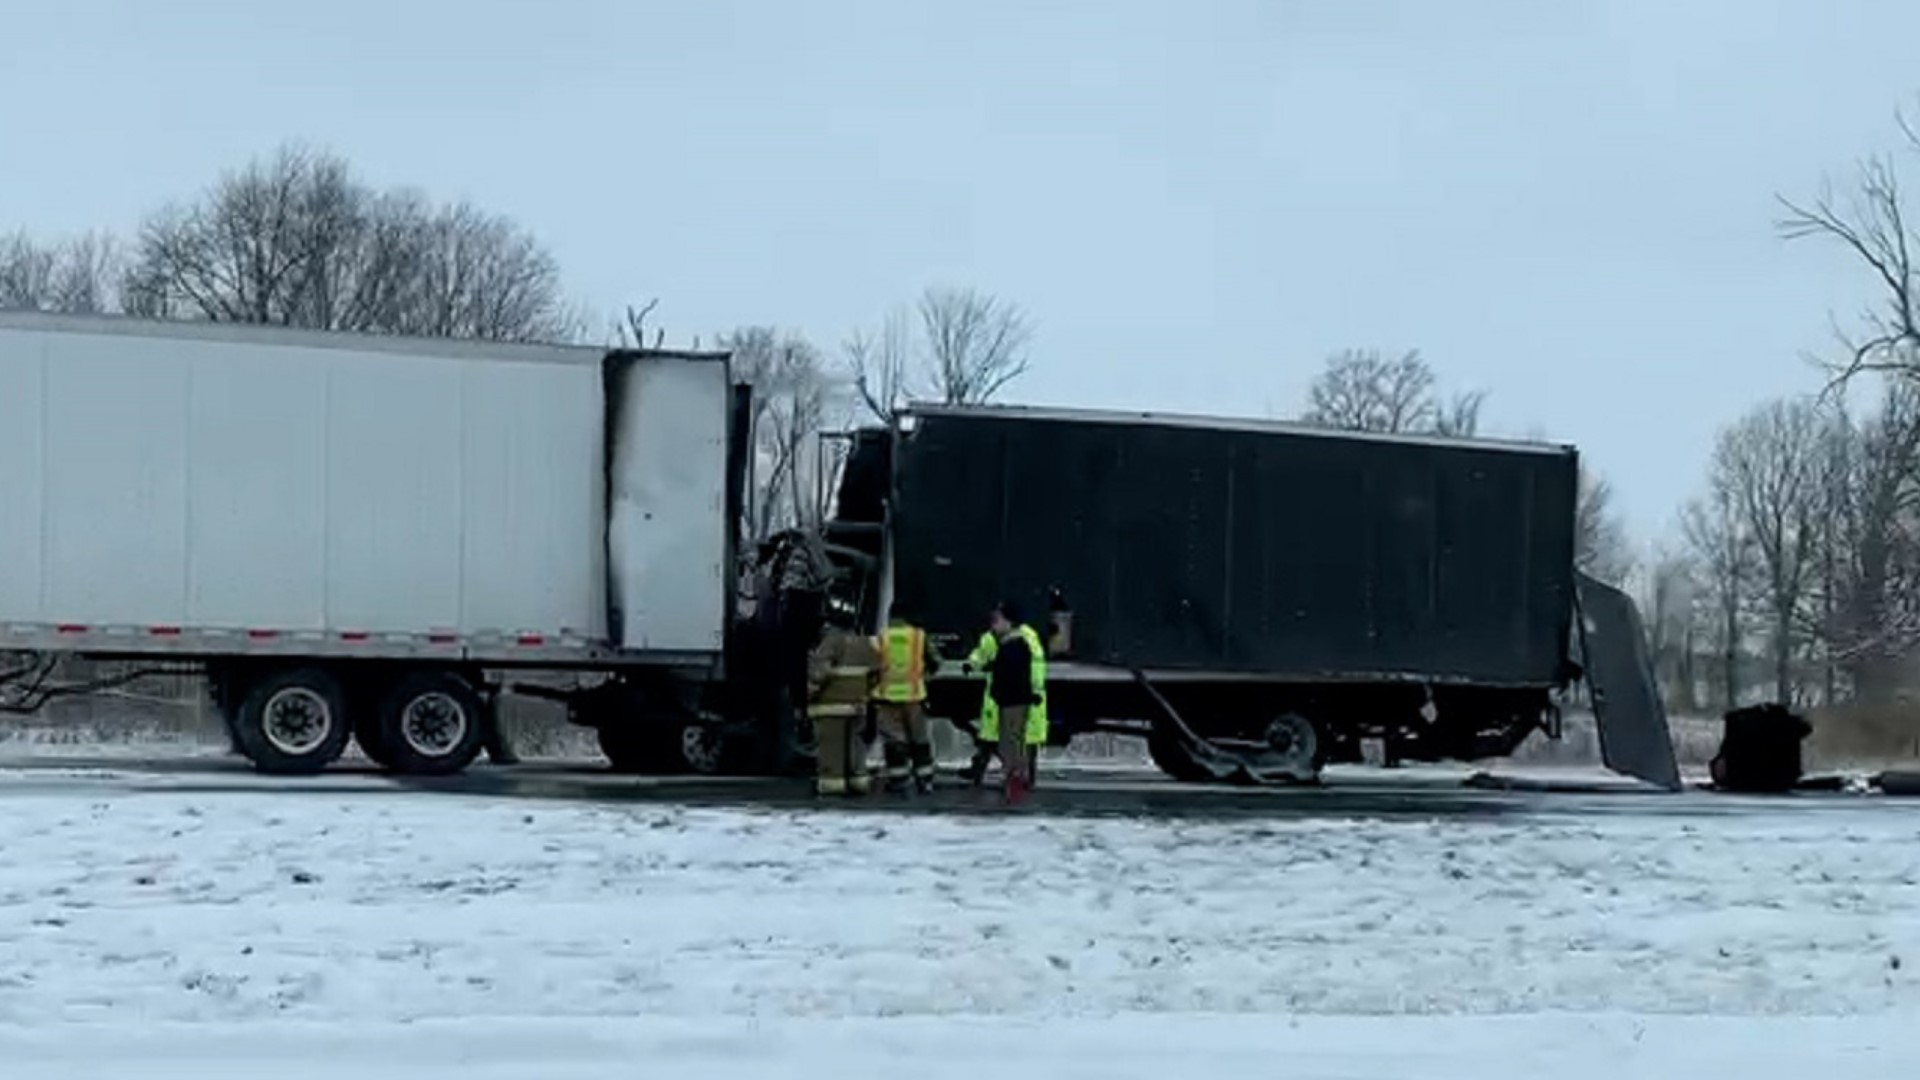 Police said snow and ice were contributing factors in the crash.